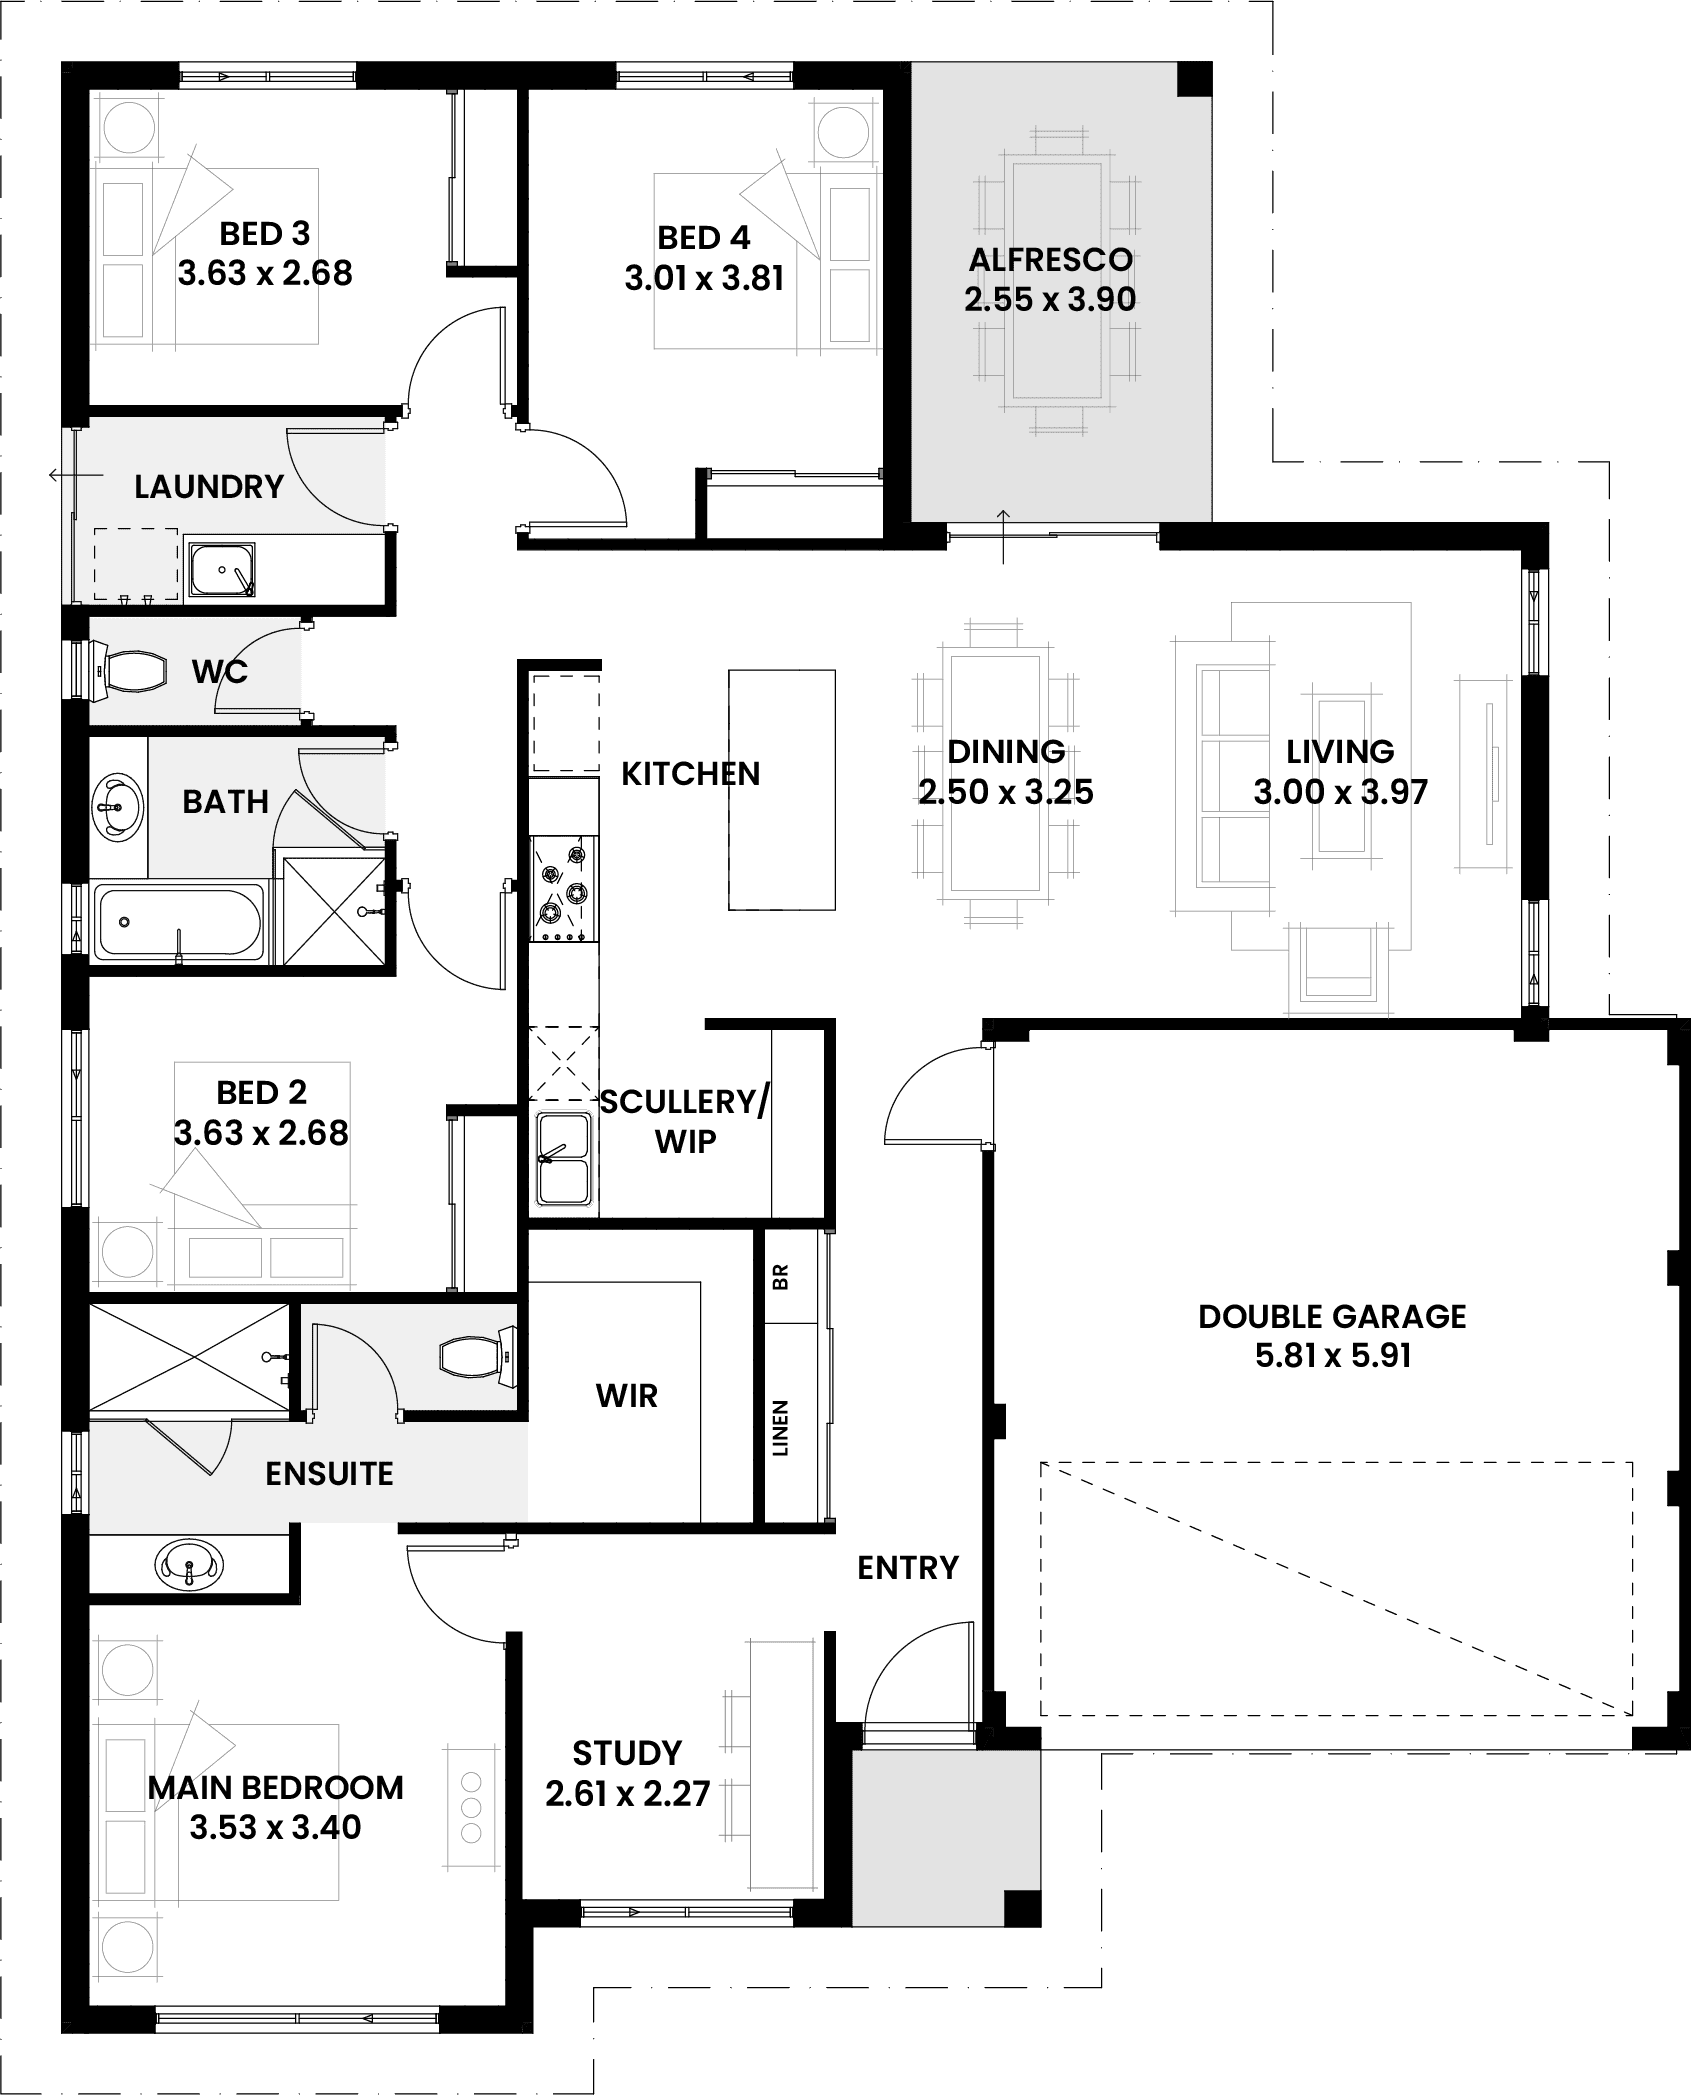 Floorplan for The Ellery, a Move Homes new home design perfect for first time buyers and new builders in Perth